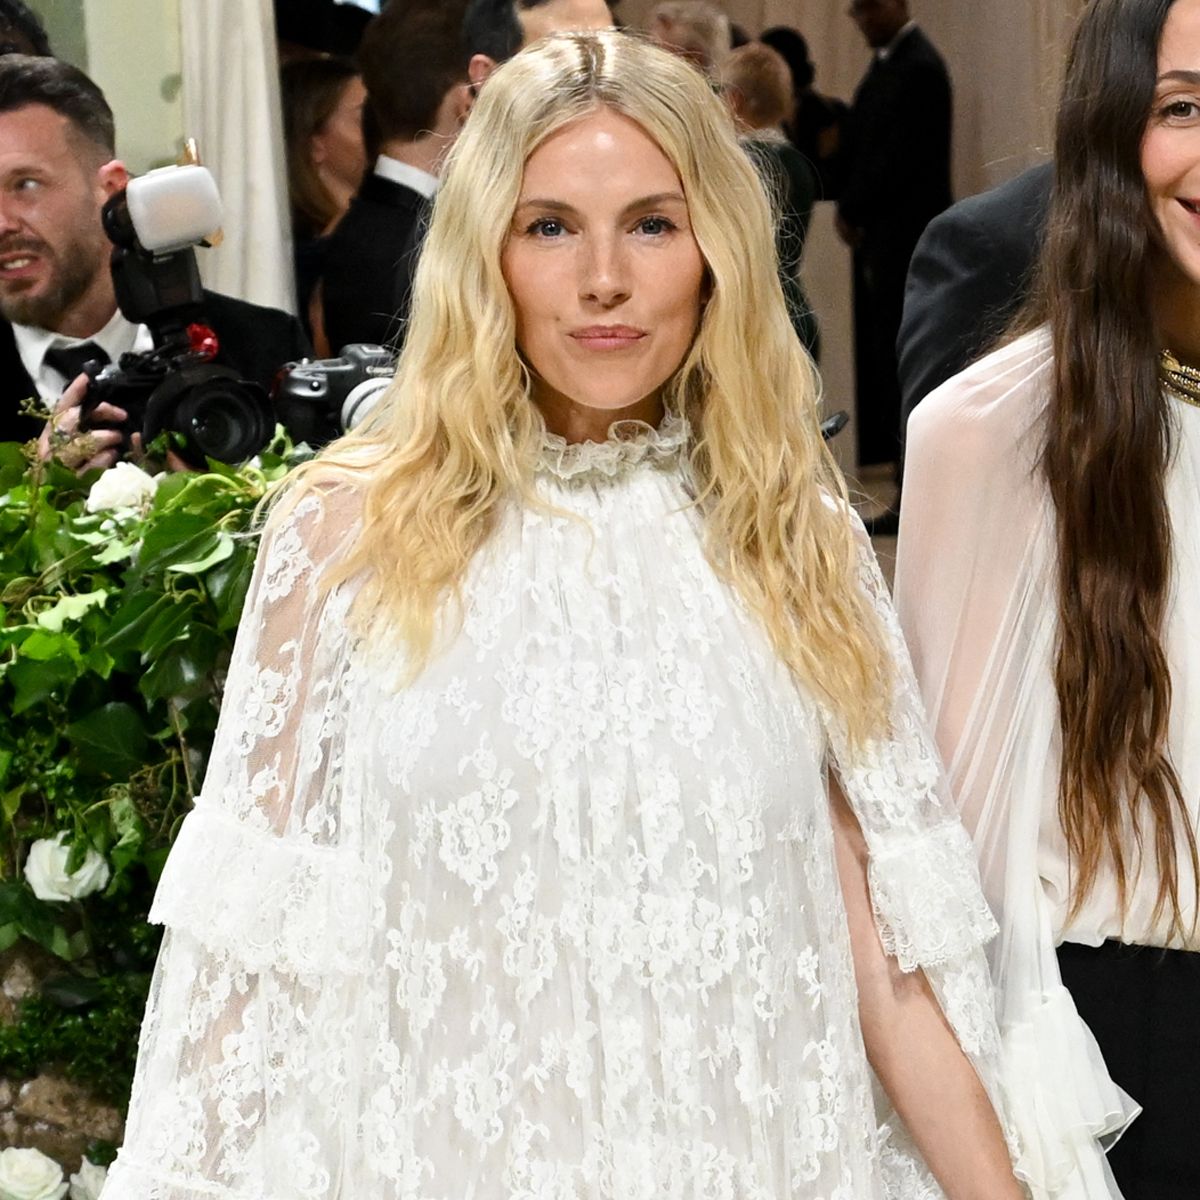 Sienna Miller Wore the Shoe Trend That’s All Over Zara and Mango to the Met Gala